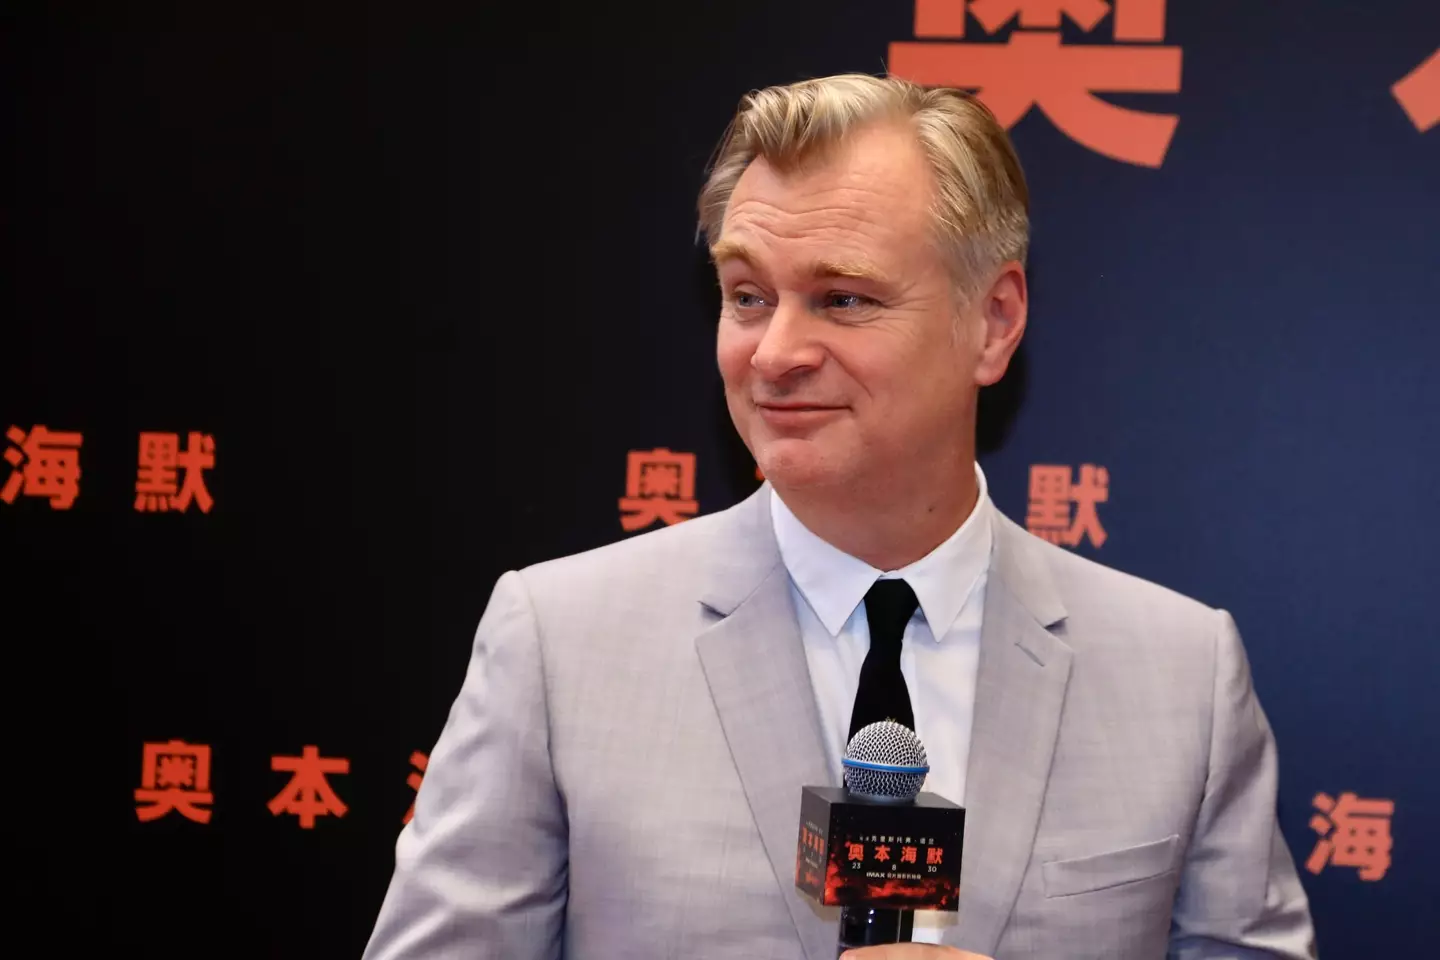 The director said that filmmakers like Christopher Nolan would save cinema.